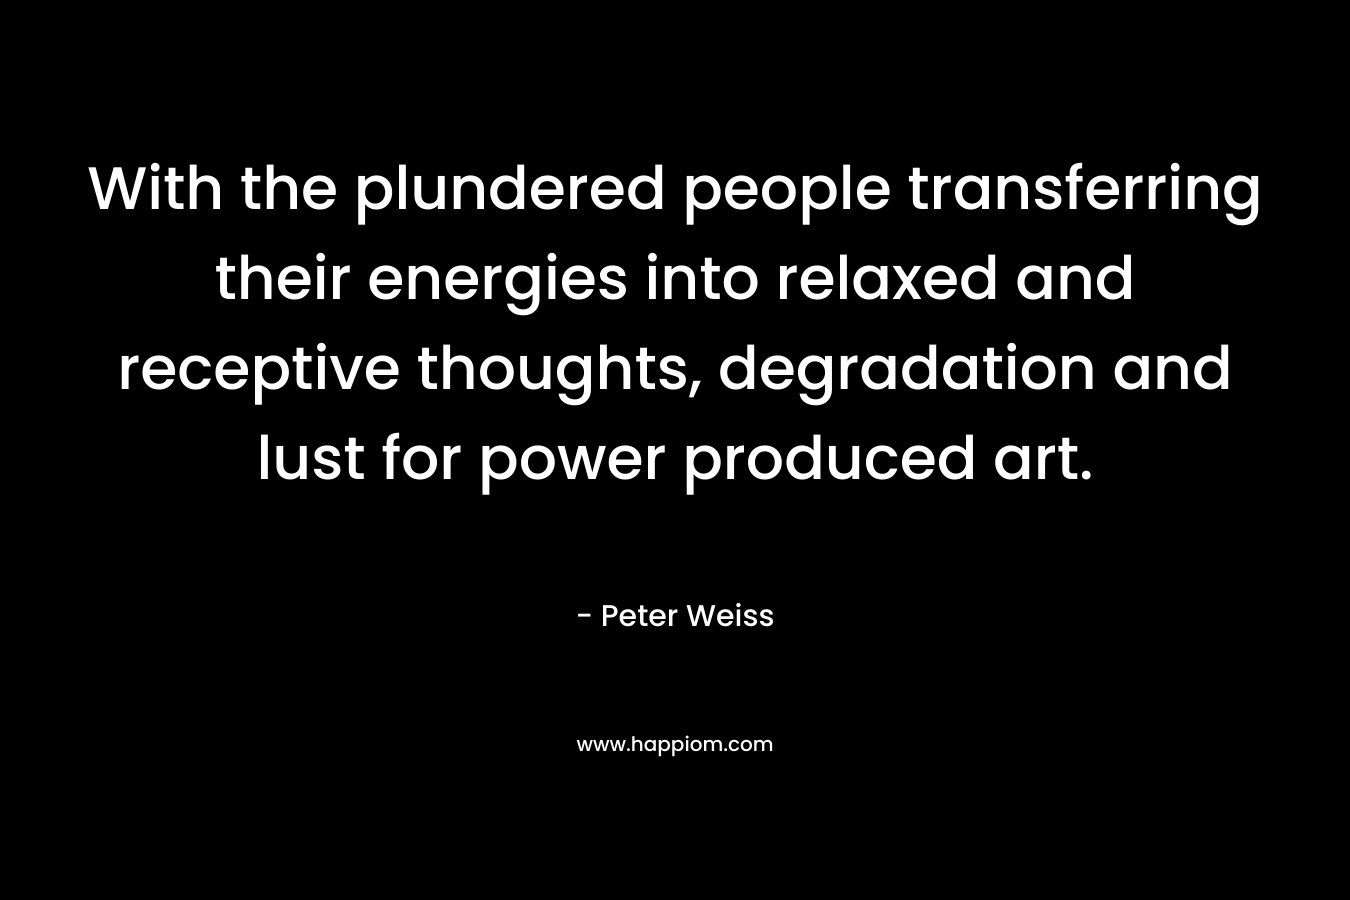 With the plundered people transferring their energies into relaxed and receptive thoughts, degradation and lust for power produced art. – Peter Weiss